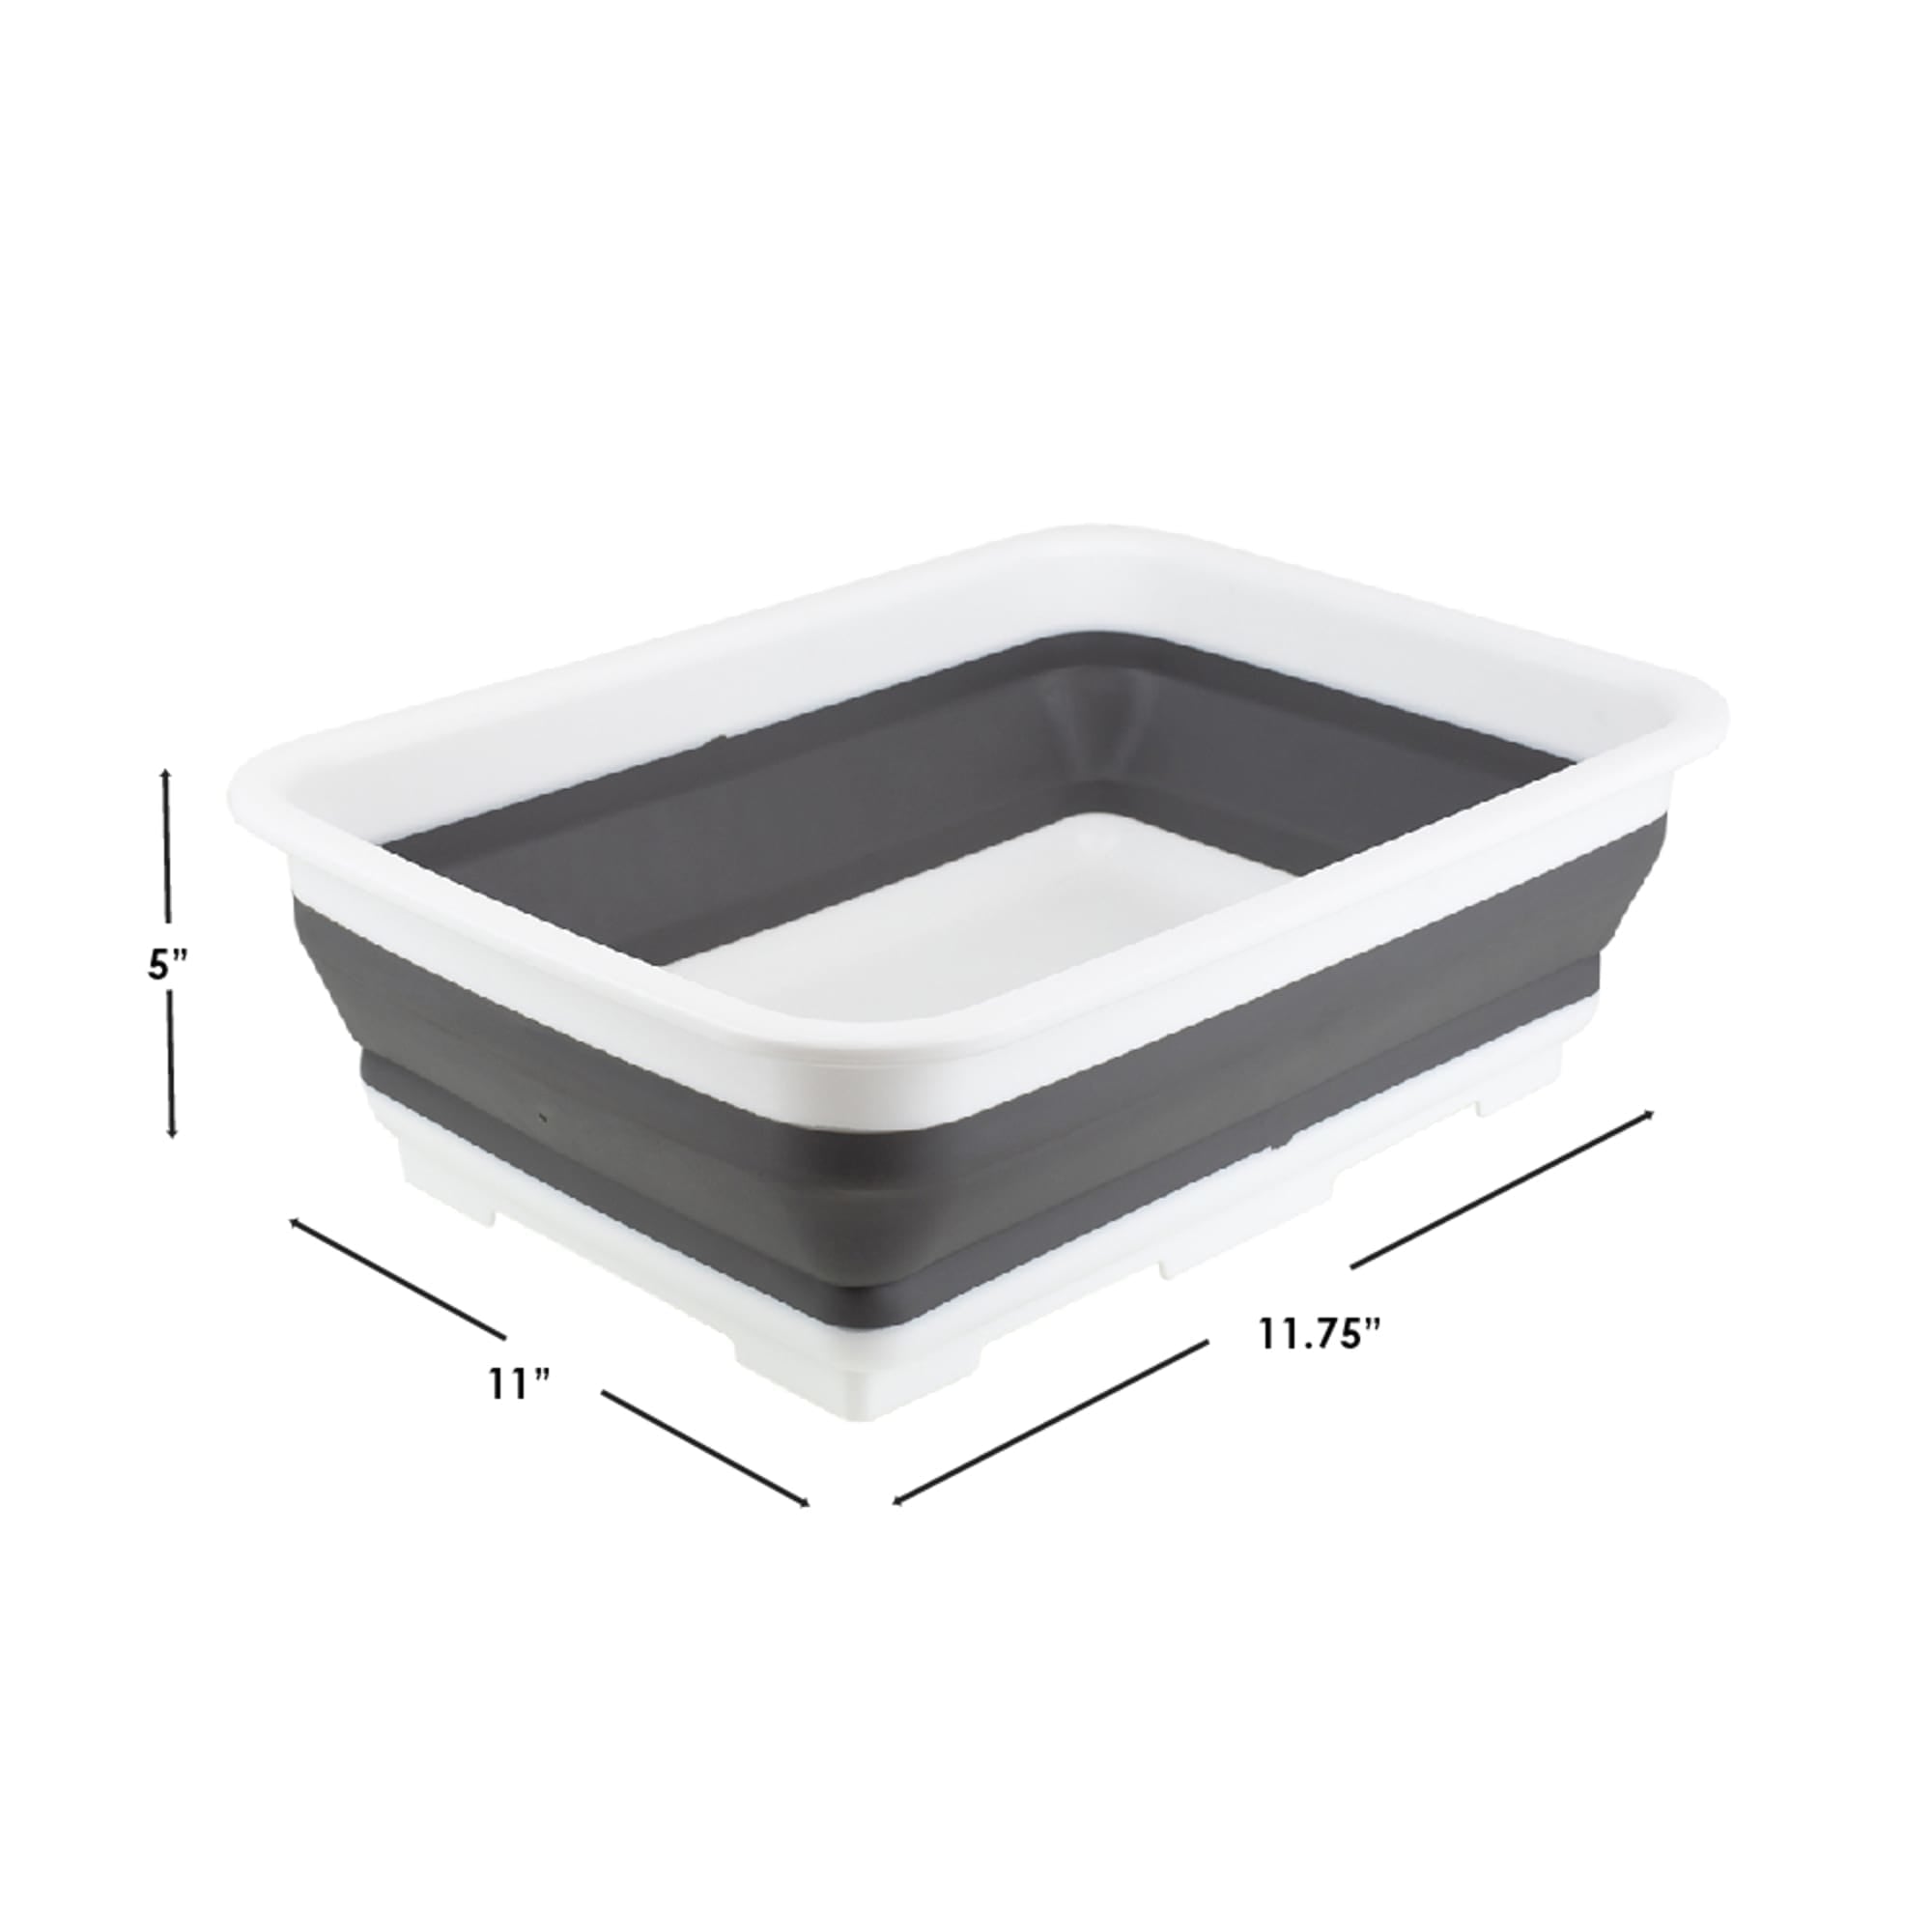 Michael Graves Design Pop Up Collapsible White Plastic and Grey Silicone Dish Pan $6.00 EACH, CASE PACK OF 12